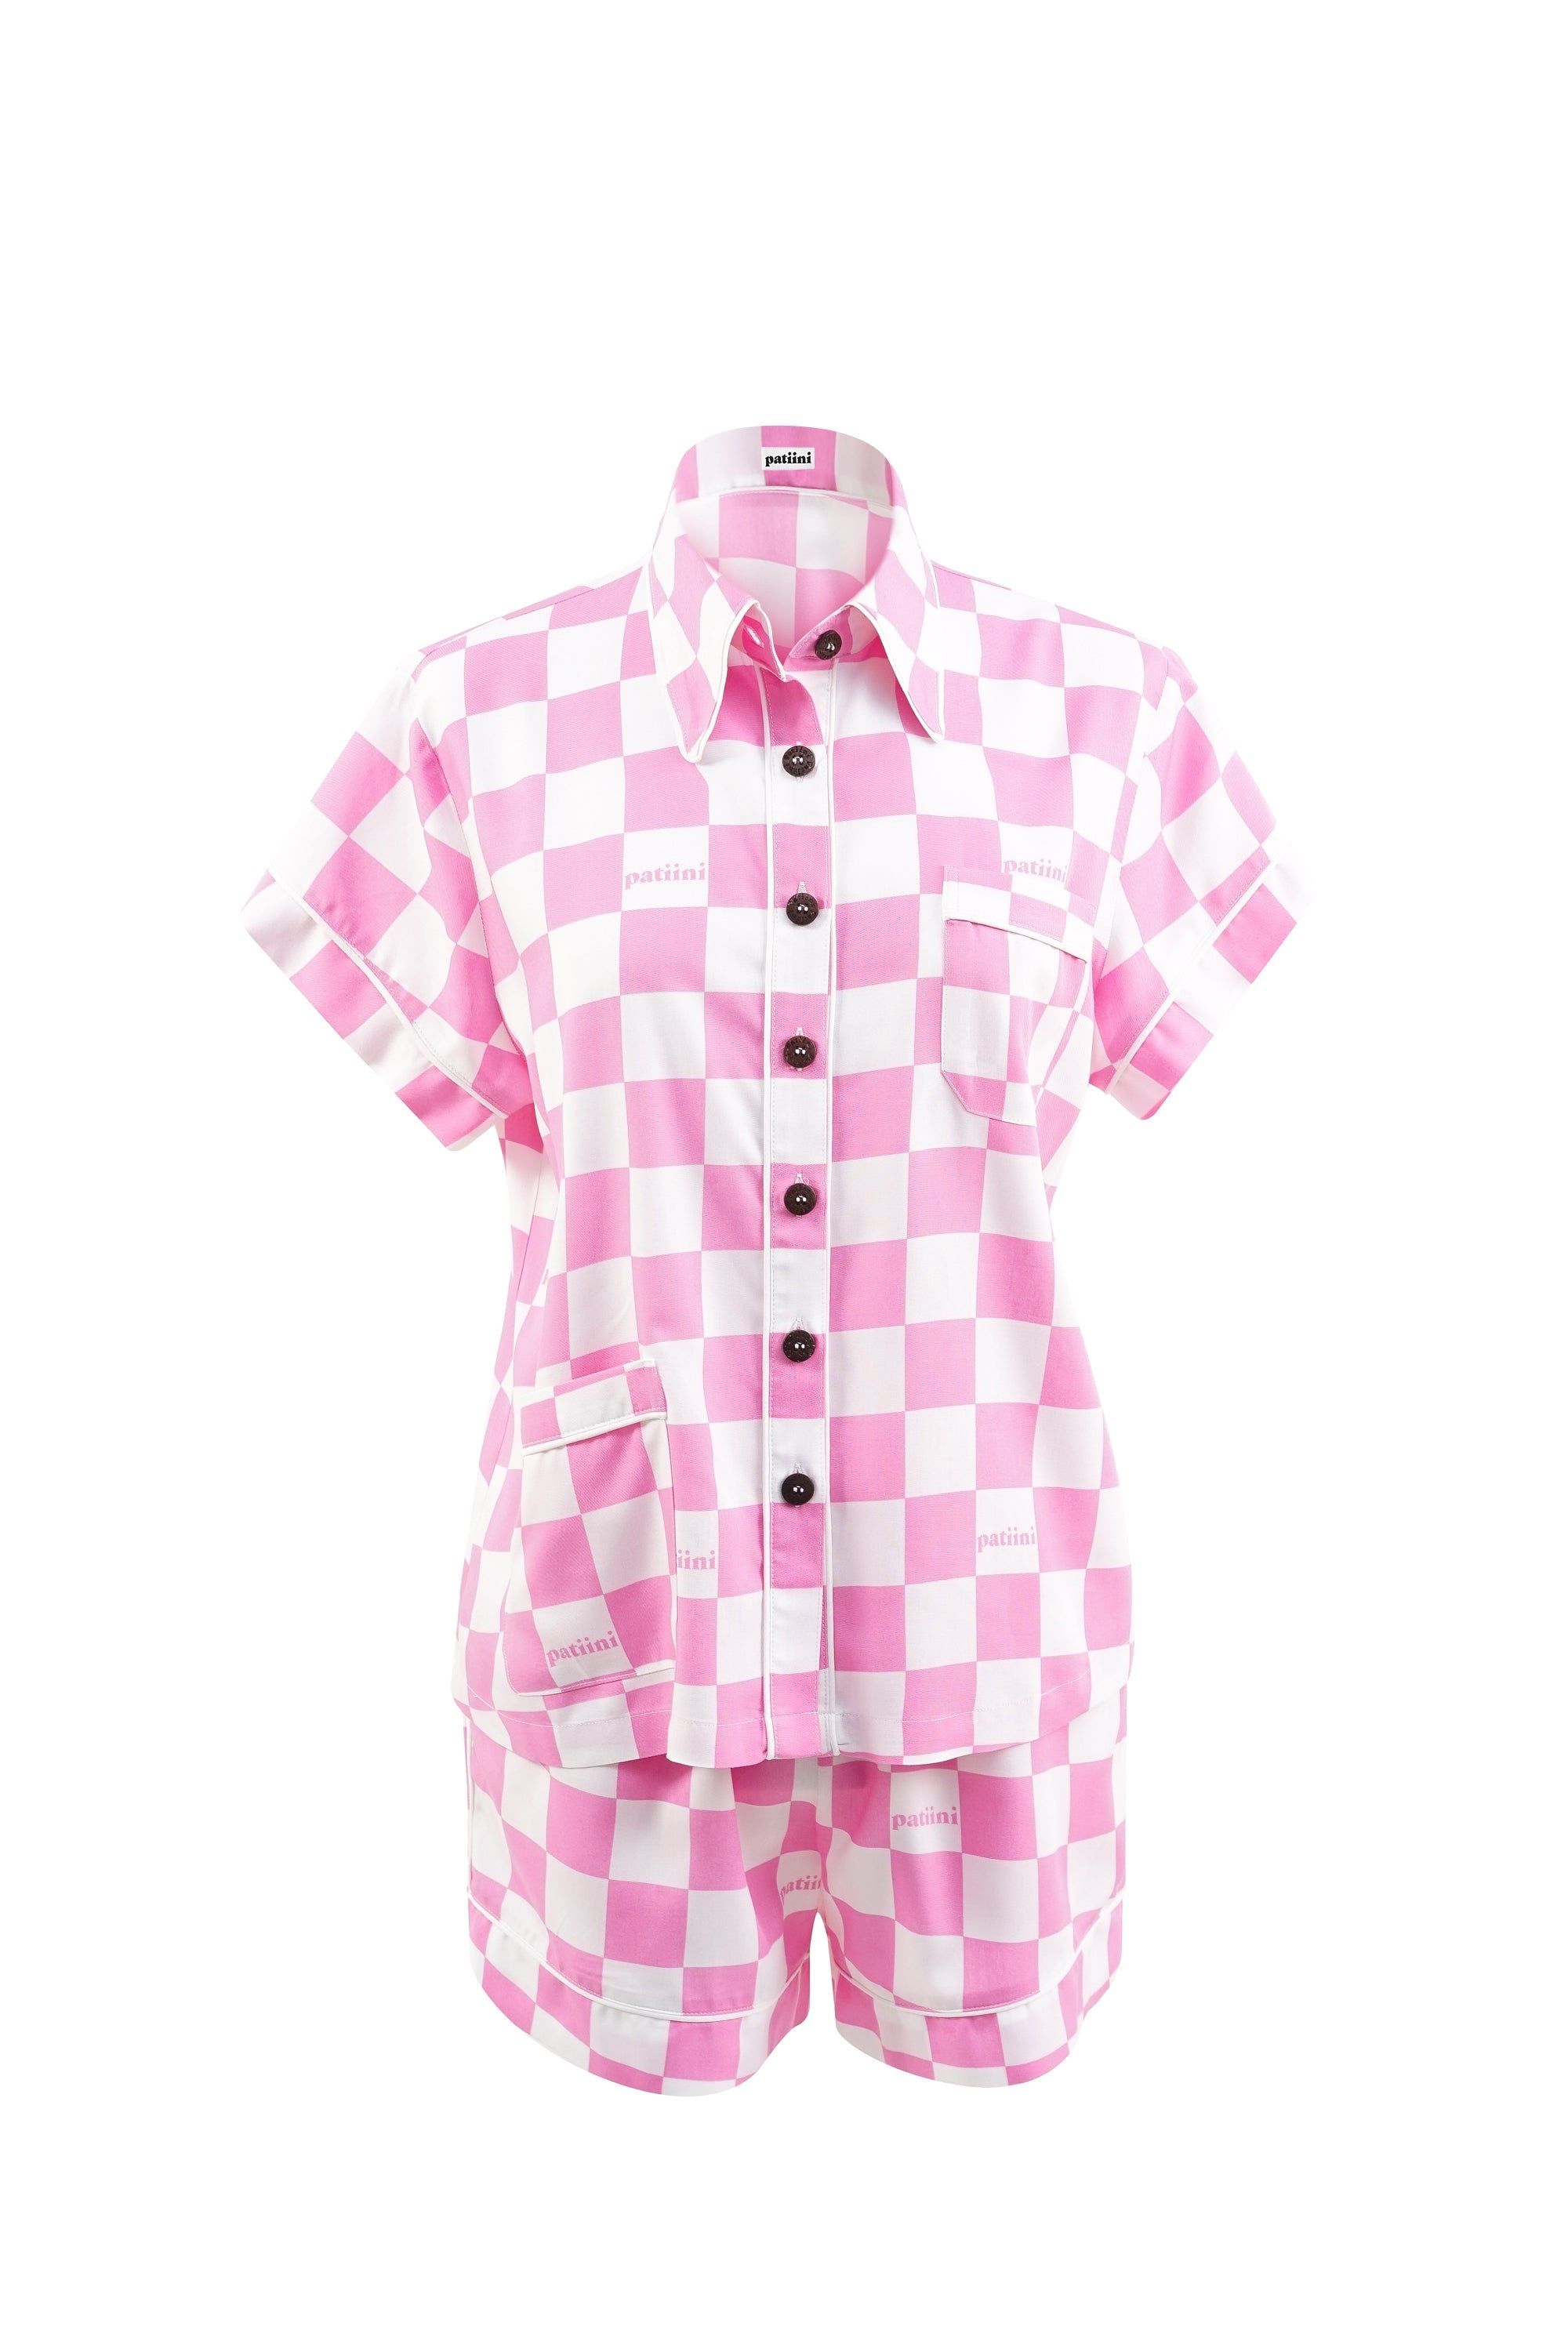 Pink and white checkered short-sleeve pajamas with white piping.